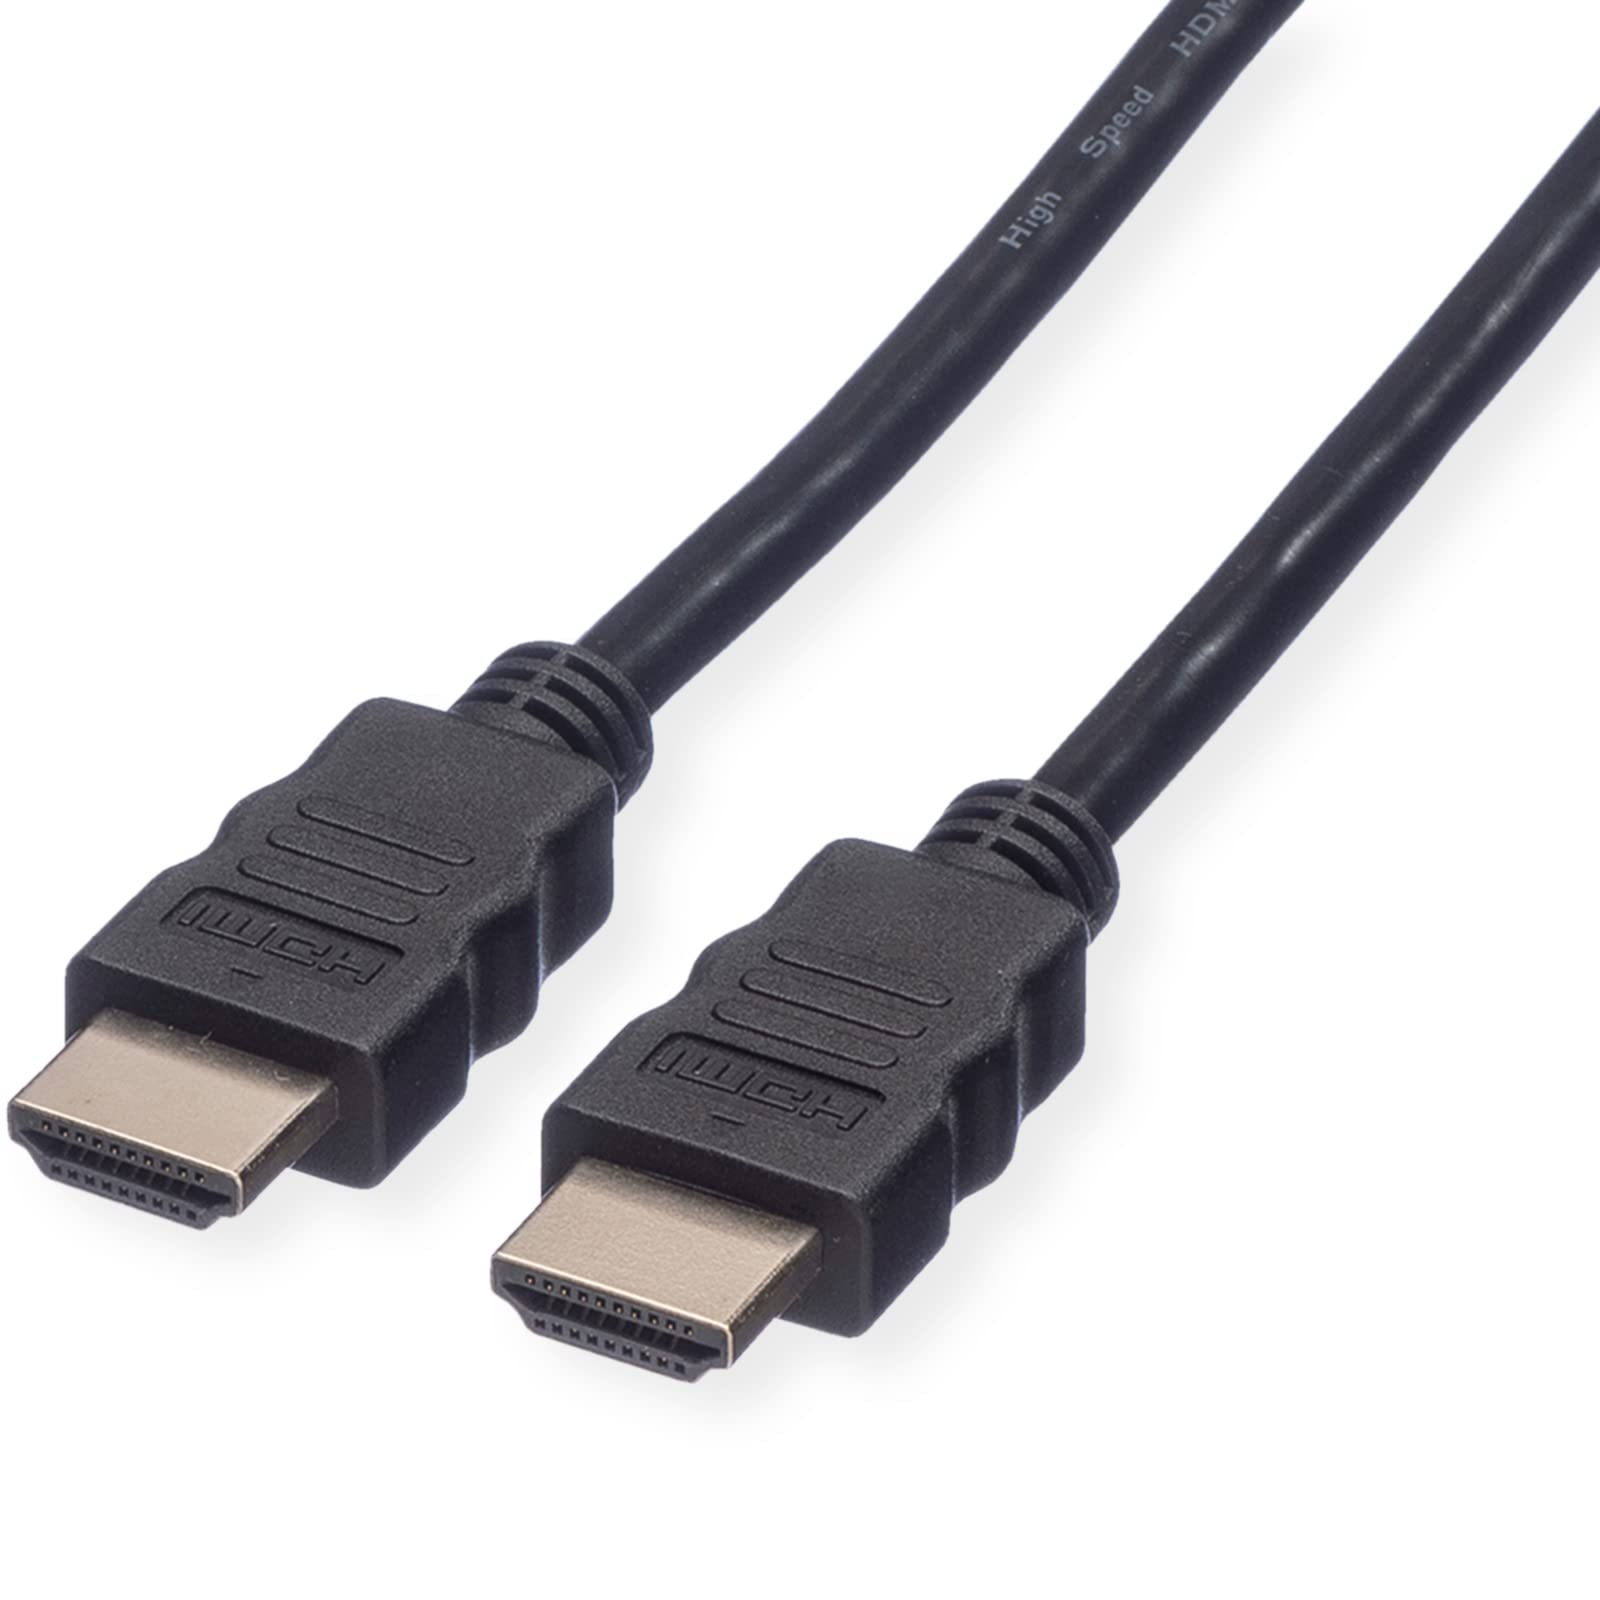 3 MT - STANDARD ULTRA HD CABLE